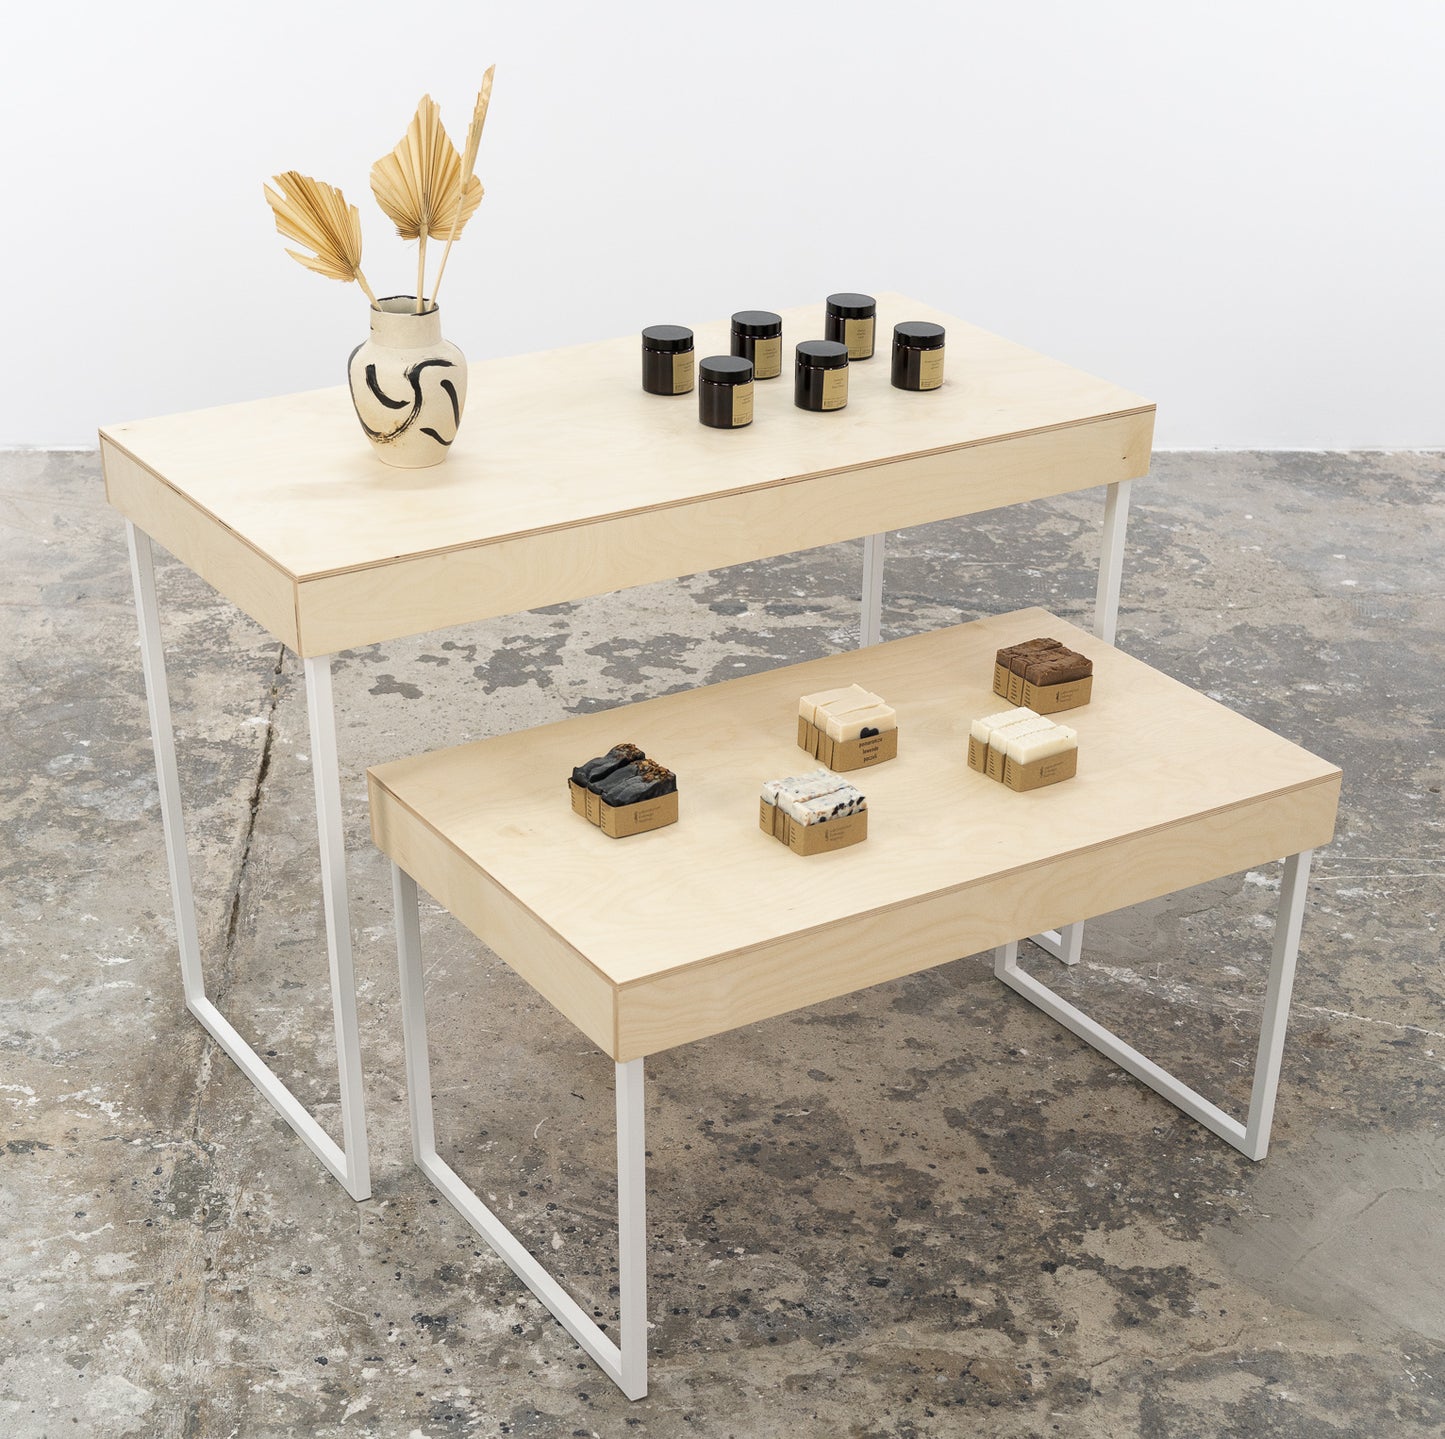 2 display tables SC-05-NT, foldable nesting tables